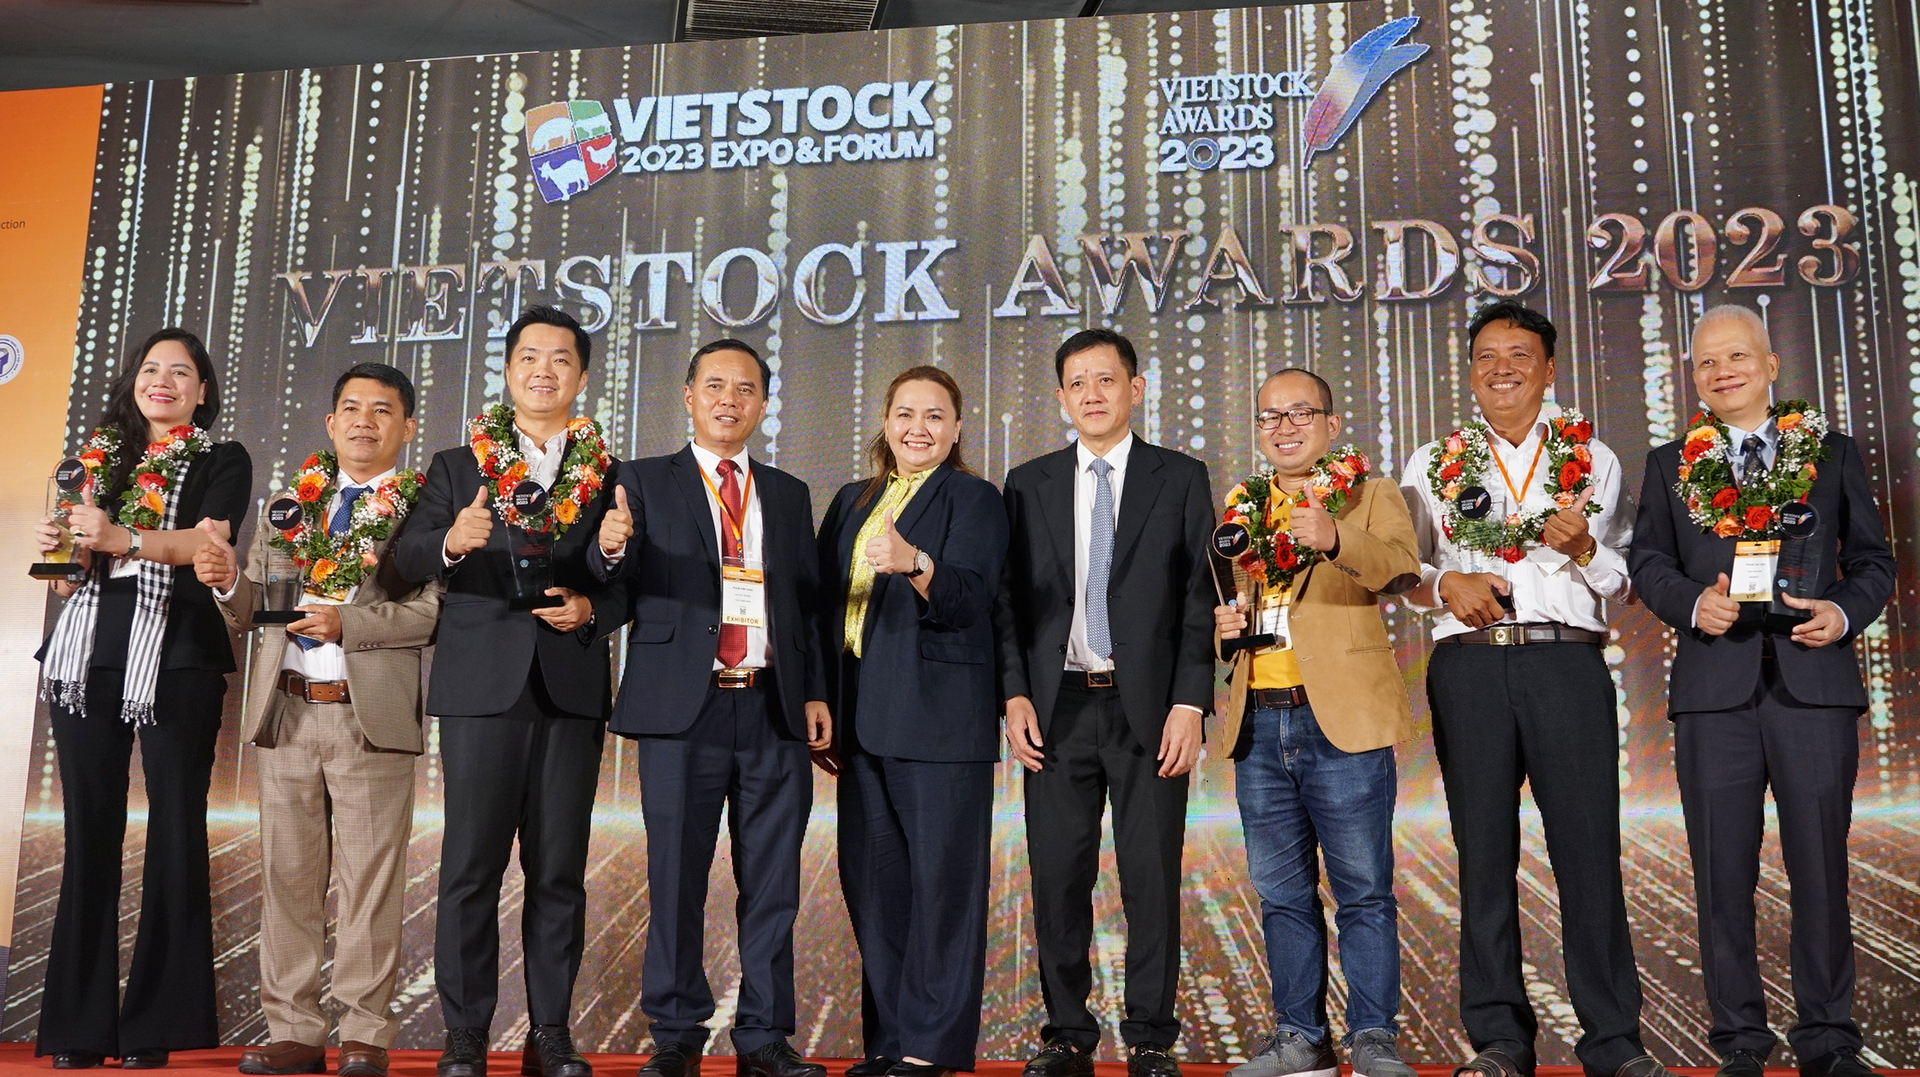 Mr. Duong Tat Thang, Director of the Department of Livestock Production; Mr. Pham Kim Dang, Deputy Director of the Department of Livestock Production and Ms. Rose Chitanuwat, Director of Asean Regional Project Chain, Informa Markets Group awarded the prestigious Vietstock Awards 2023 to seafood enterprises. Photo: Nguyen Thuy.